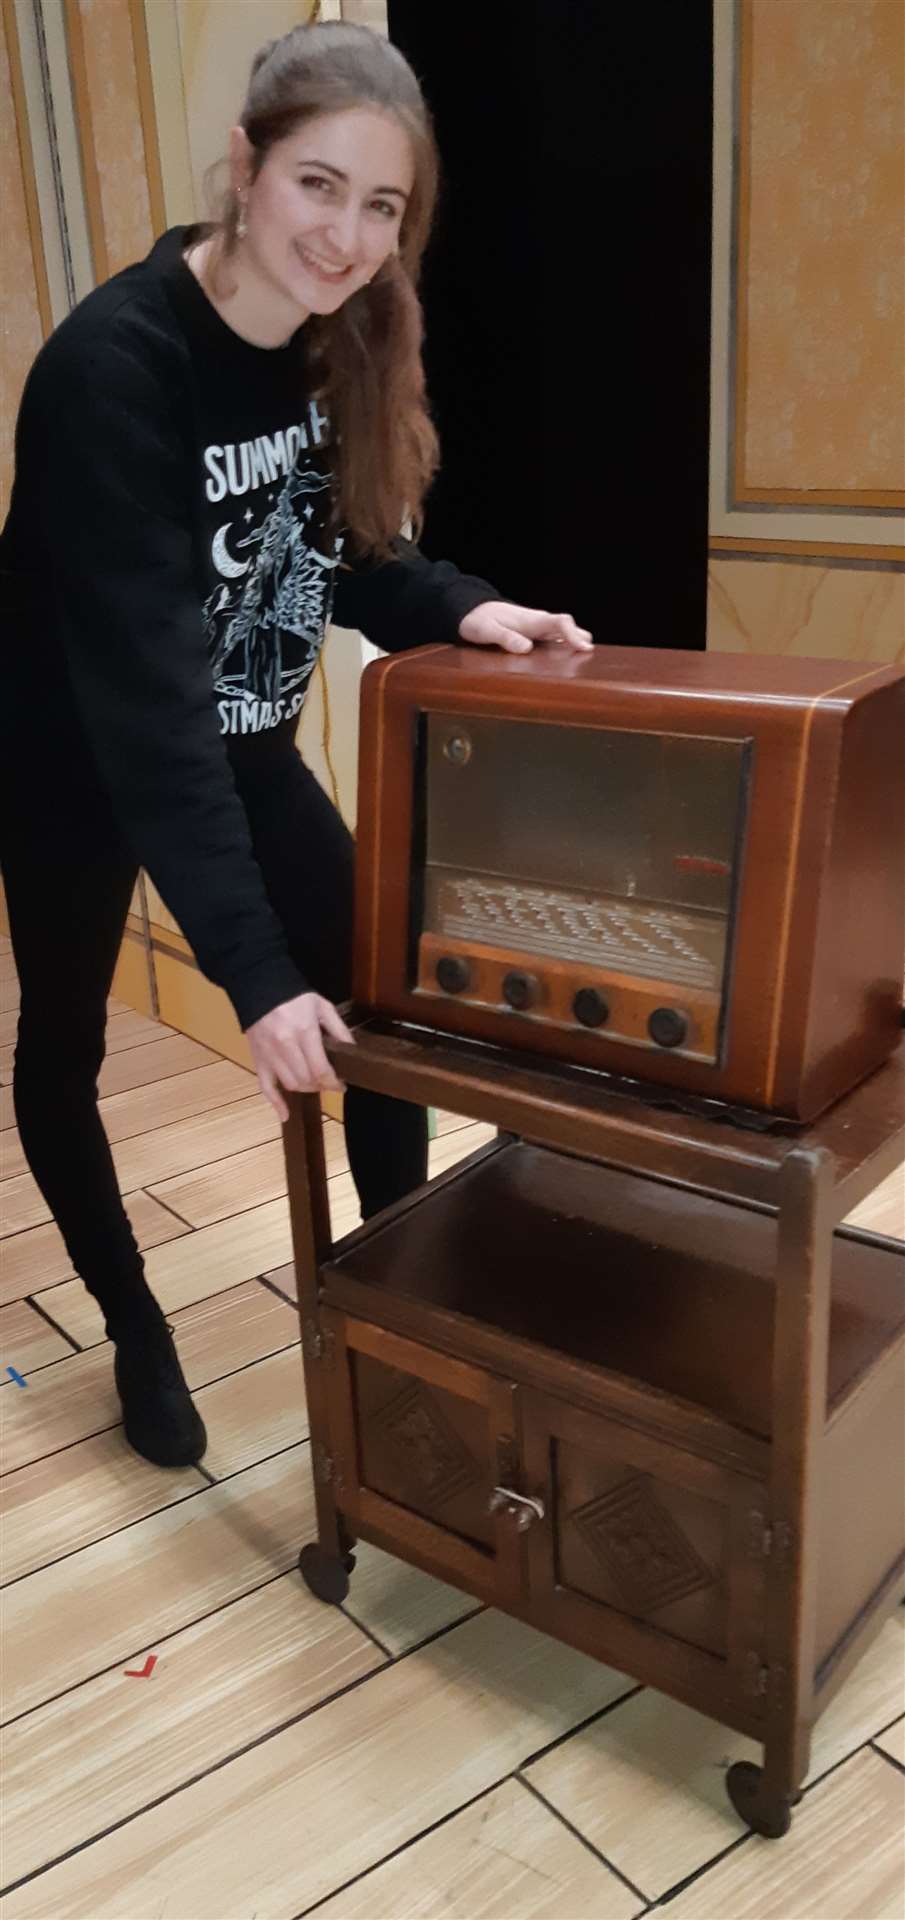 Tabitha Dodds, assistant stage manager for Snow White, with the vintage radio borrowed from her grandparents’ neighbour